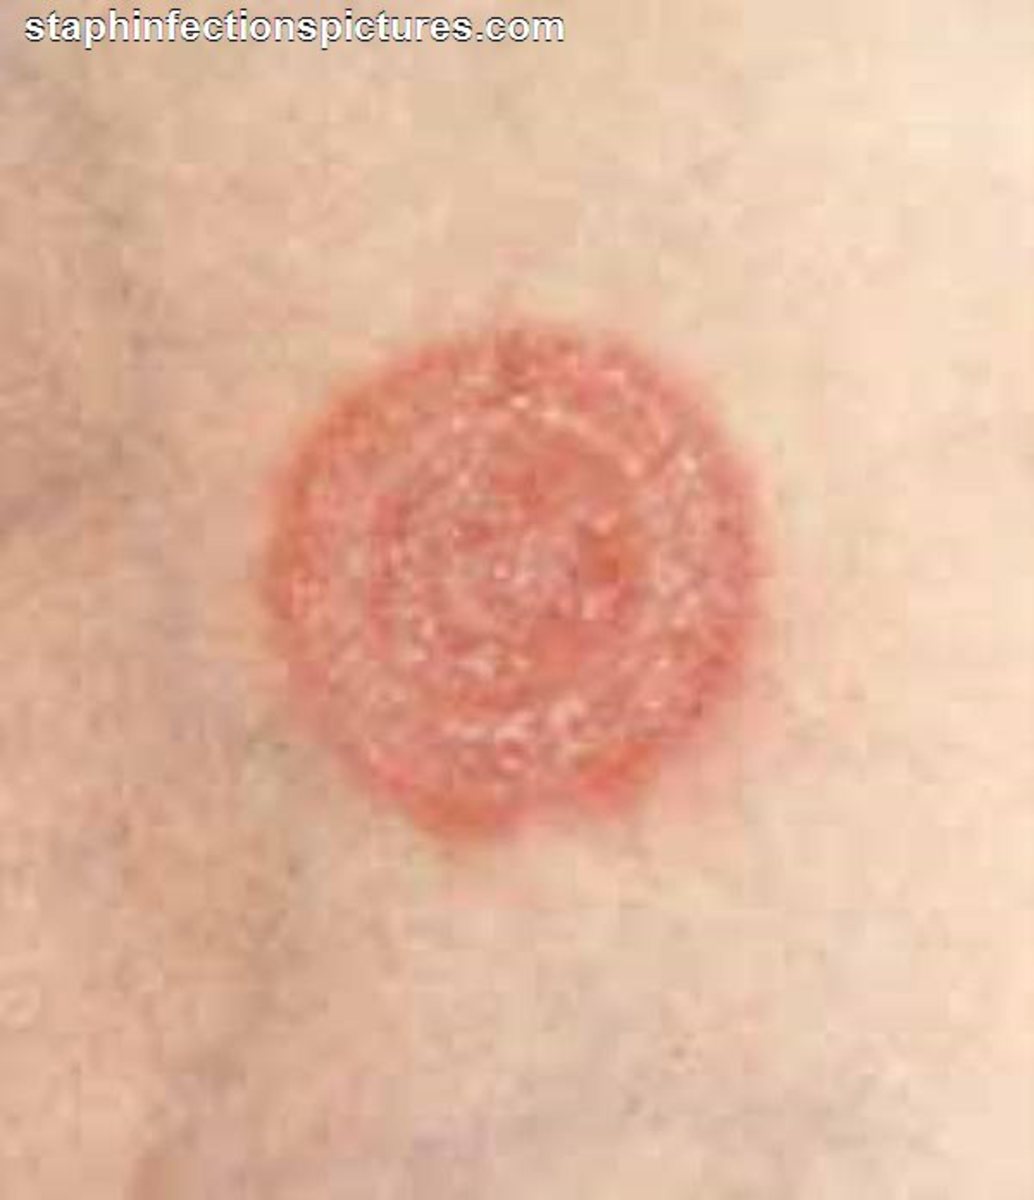 How Do You Get Ringworm - Can You Get Ringworm If Unclean